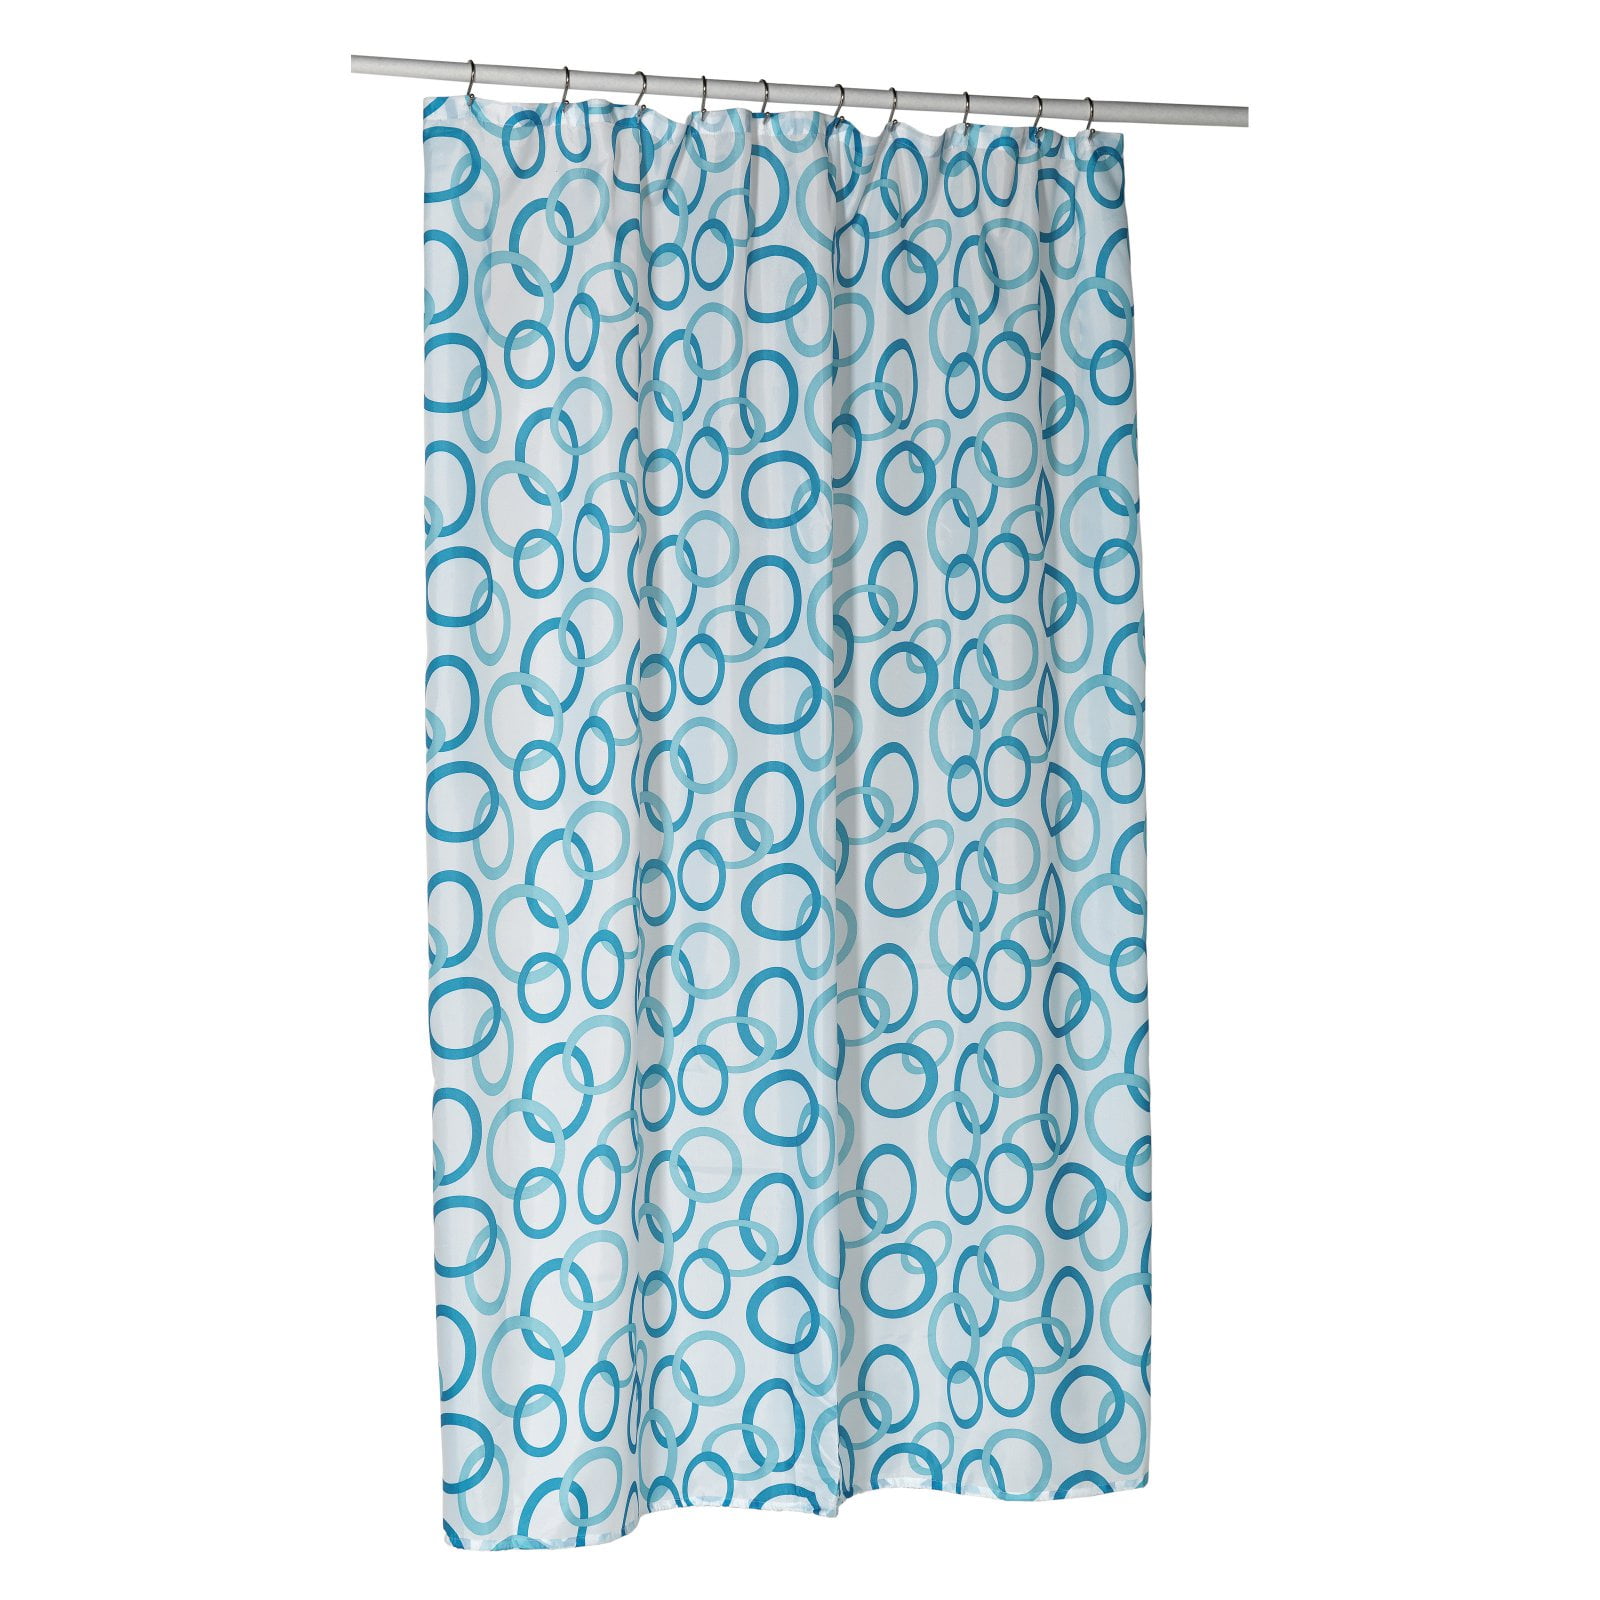 Long Polyester Shower Curtain Liner, Do I Need A Liner With Polyester Shower Curtain